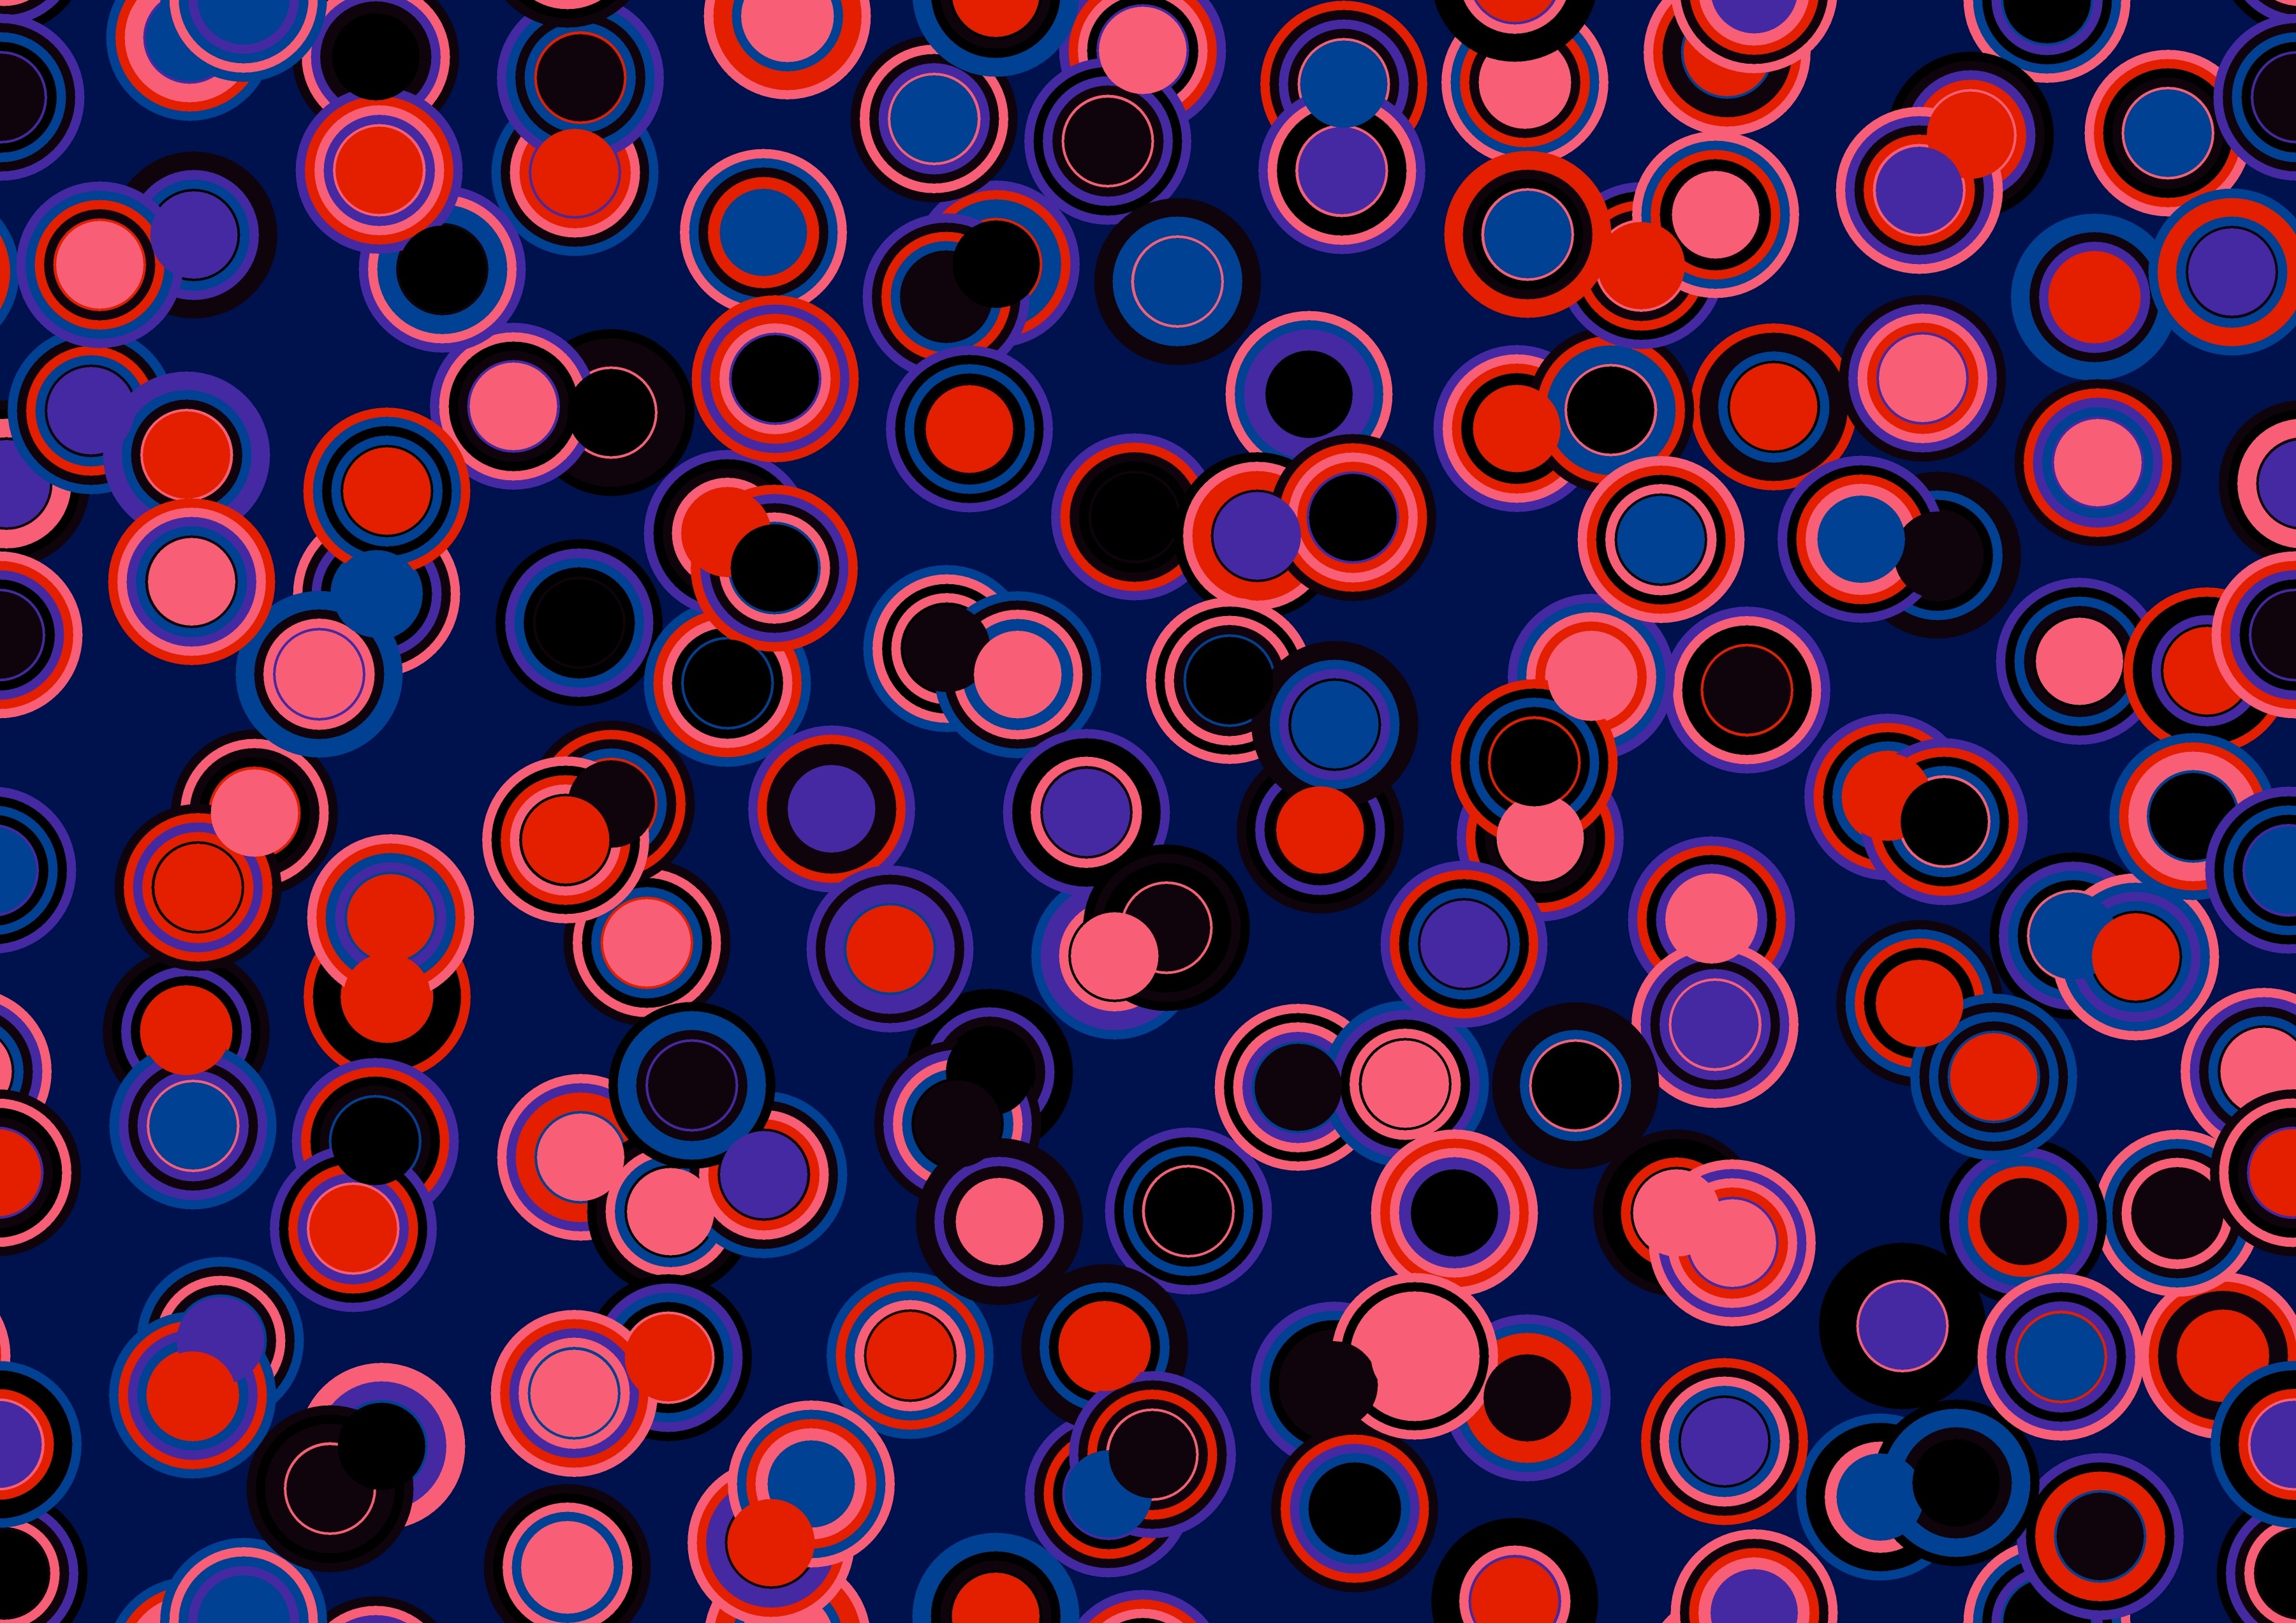 motley, form, circles, multicolored, texture, textures, forms iphone wallpaper